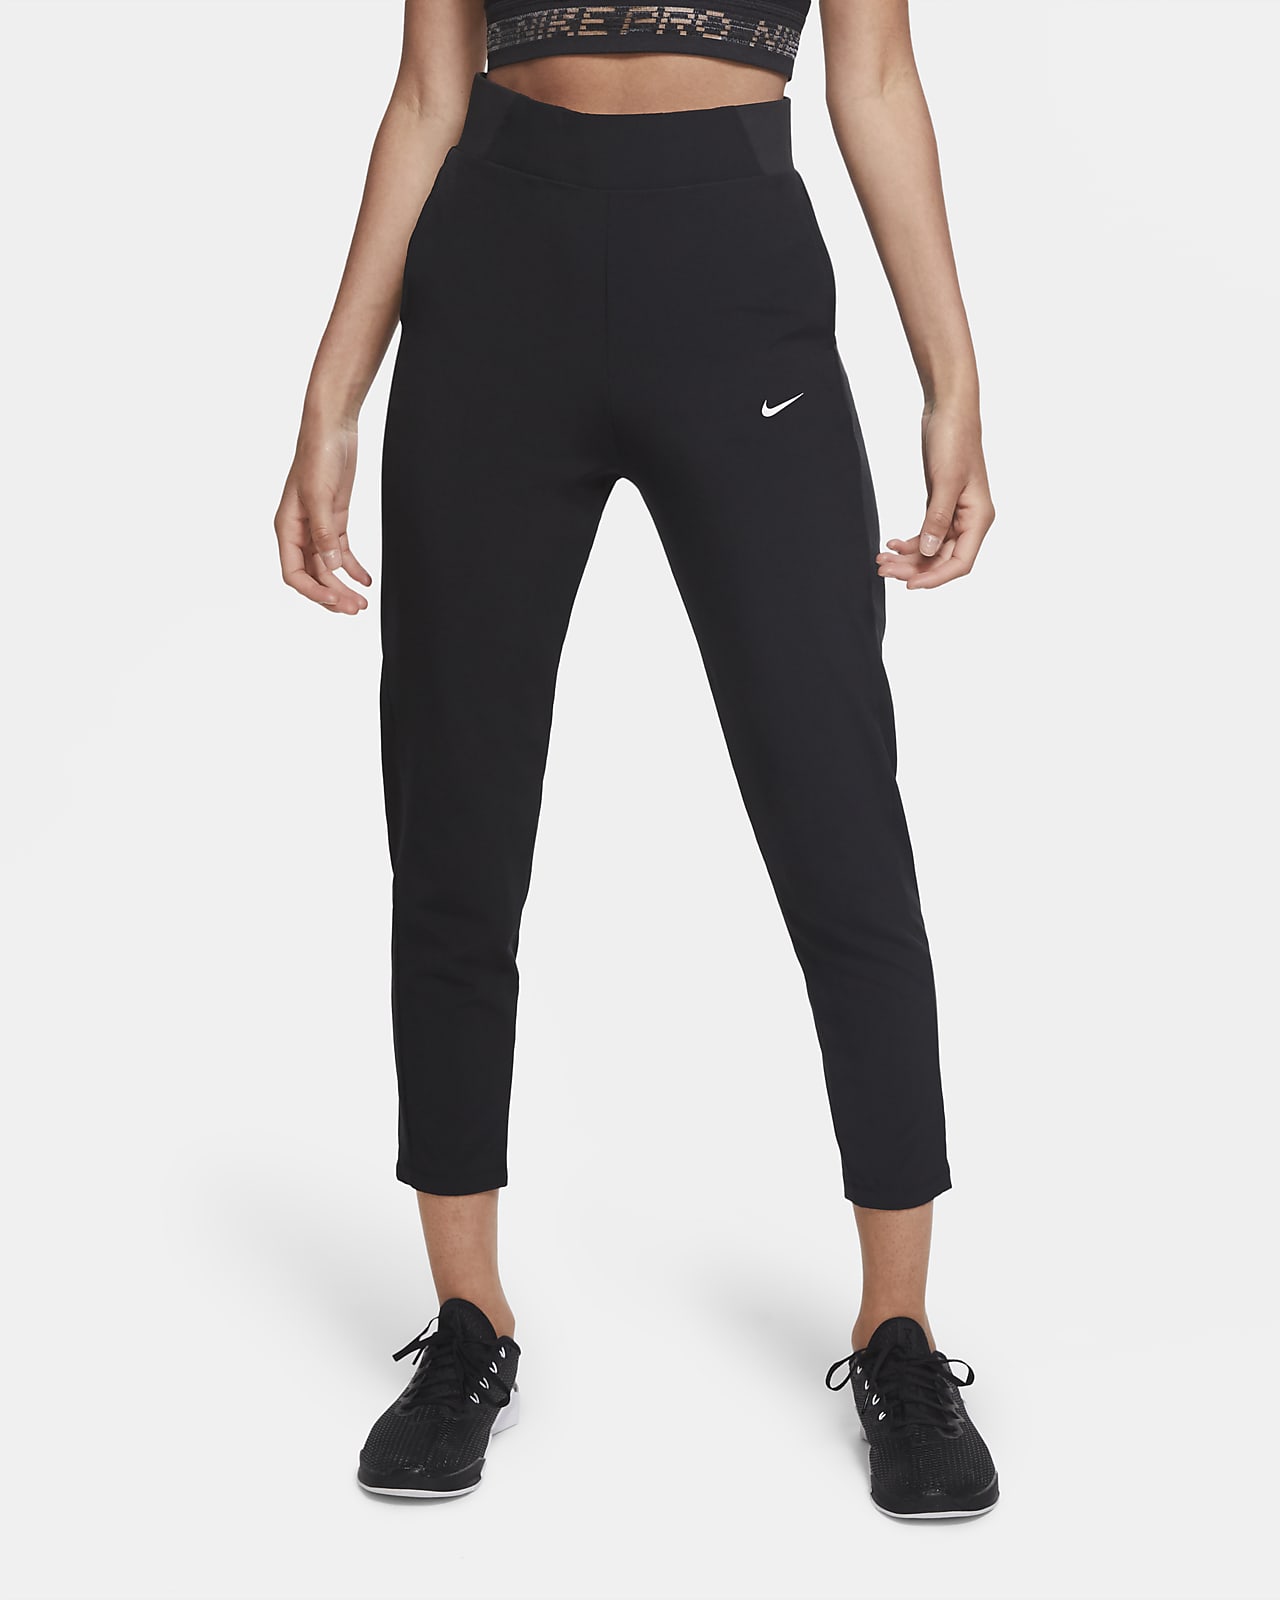 Discover more than 86 nike dri fit pants womens latest